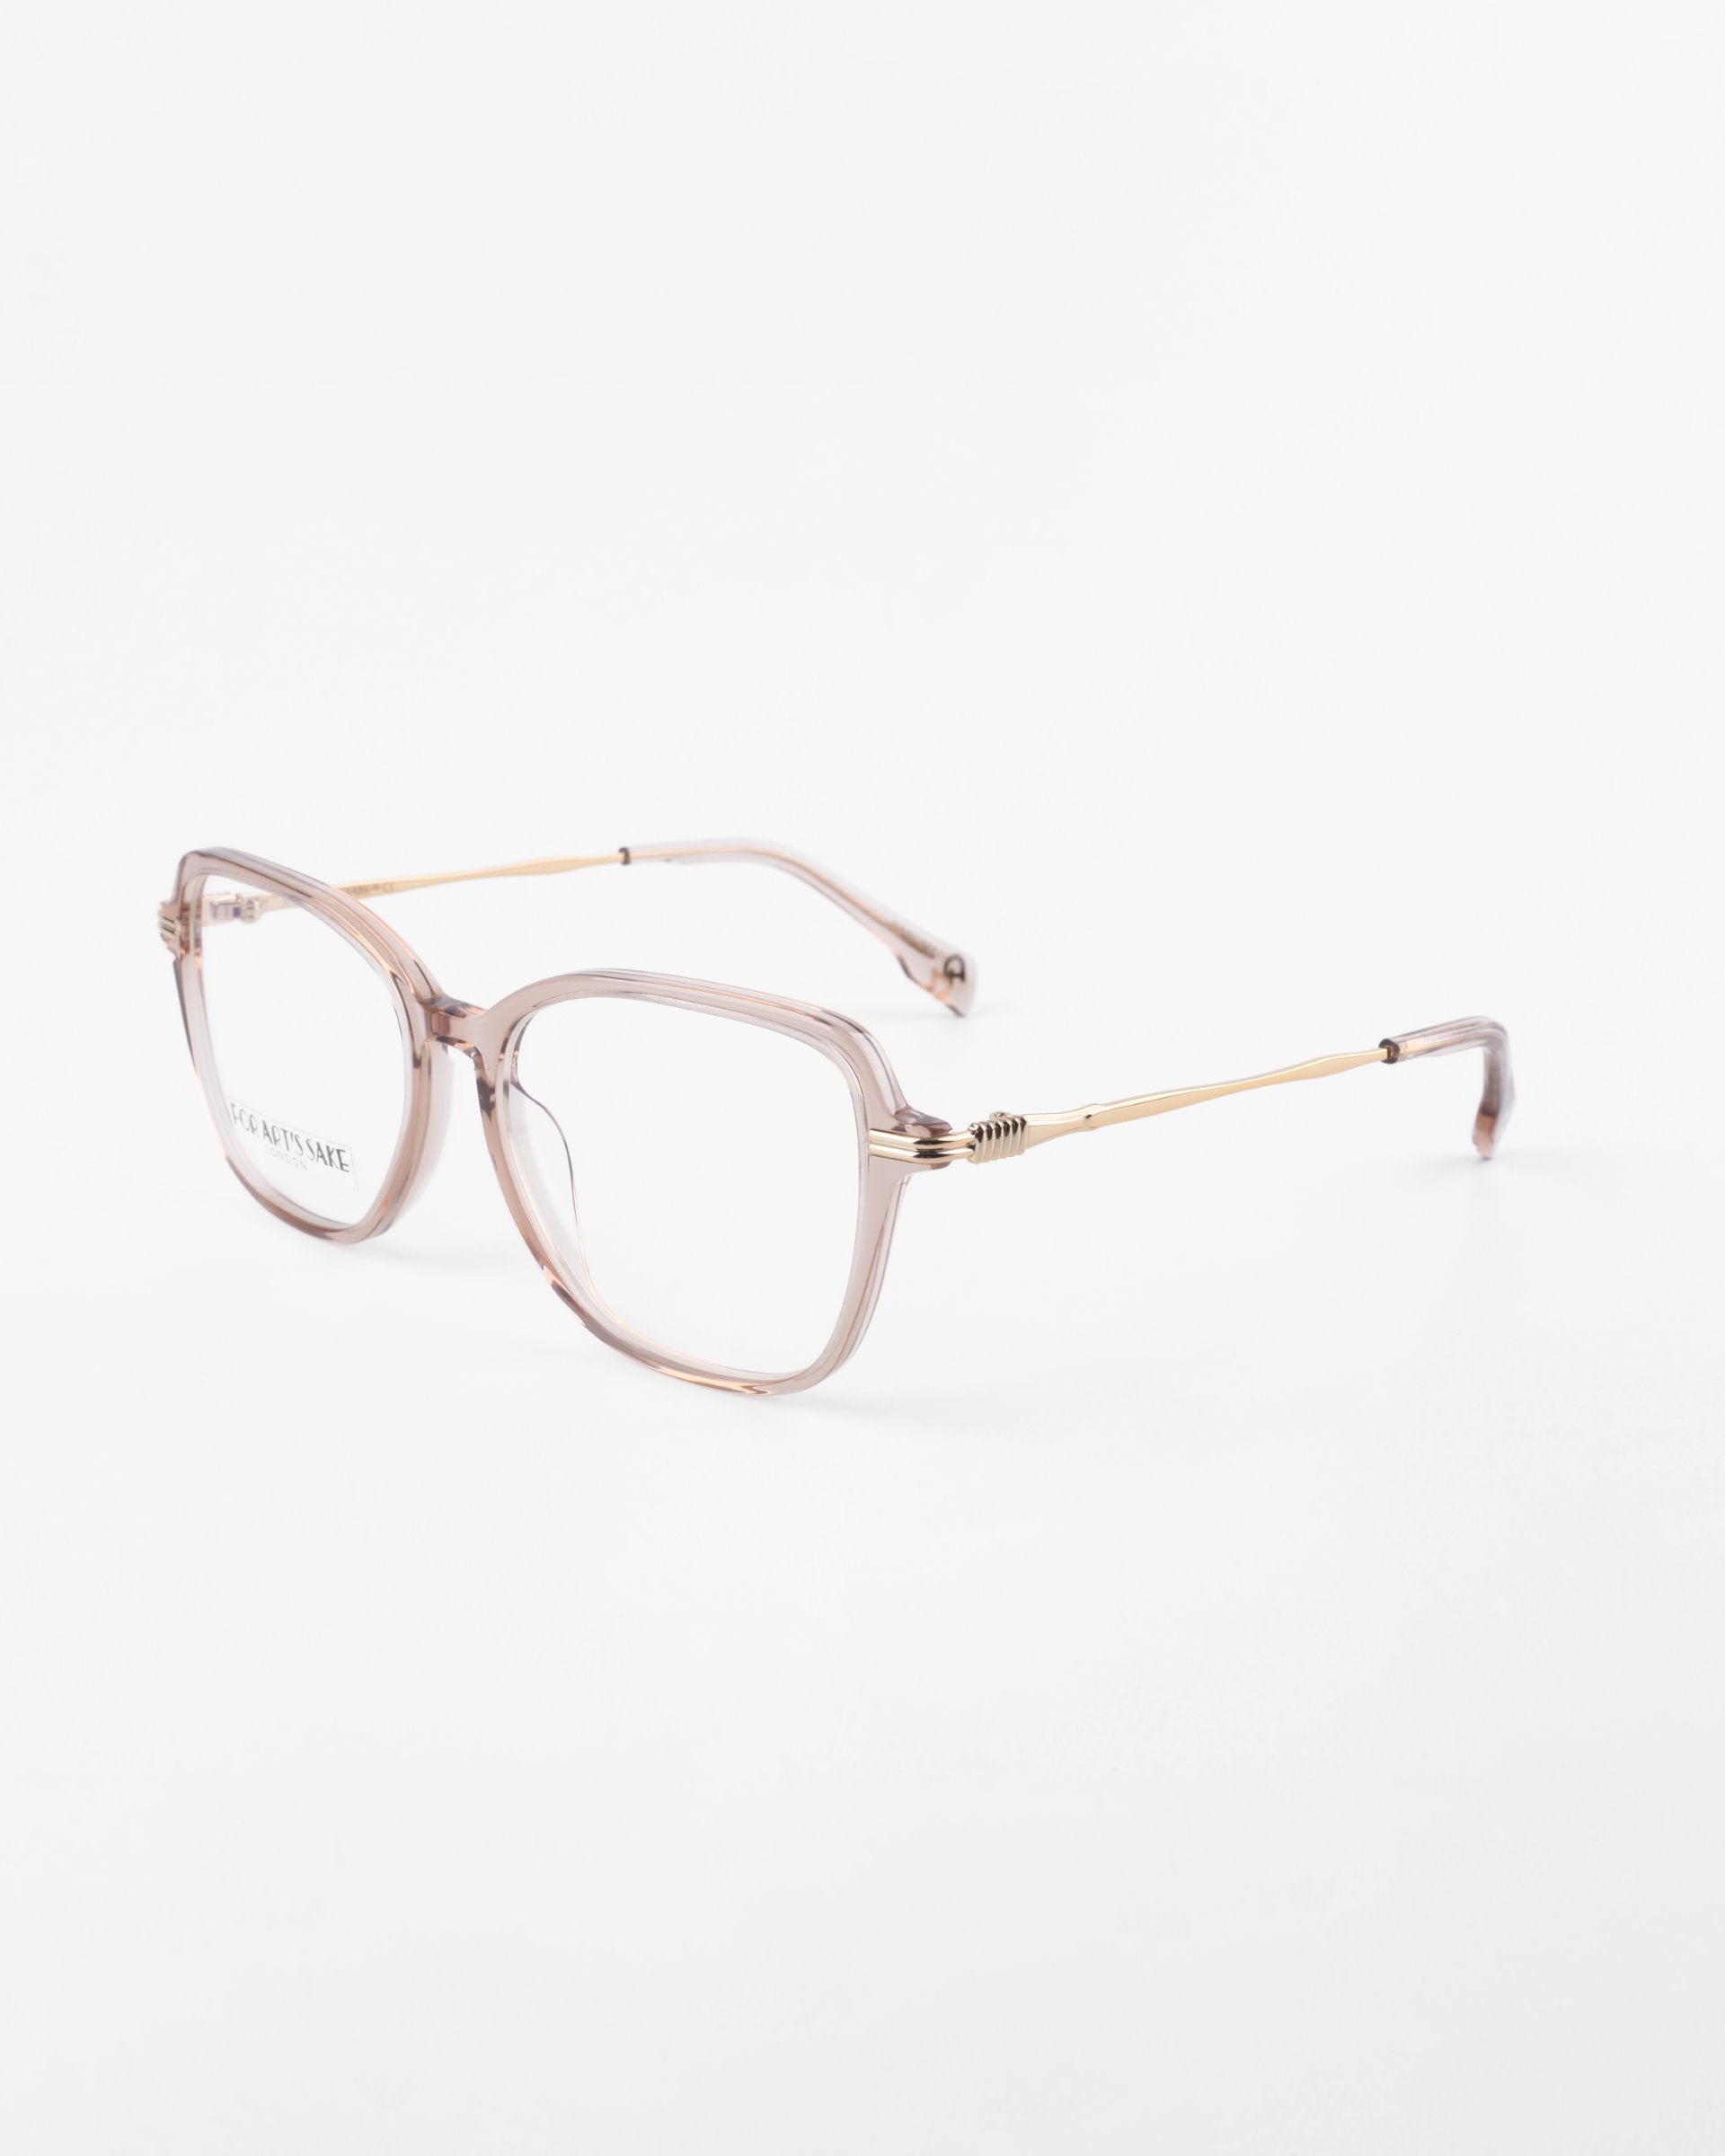 A pair of transparent, square-shaped eyeglasses with thin, 18-karat gold-plated temples and spring hinges on a plain white background. The frames have a subtle pink tint, and the ends of the temples are also pink. These stylish Sonnet glasses from For Art&#39;s Sake® come with blue light filter prescription lenses for added comfort.